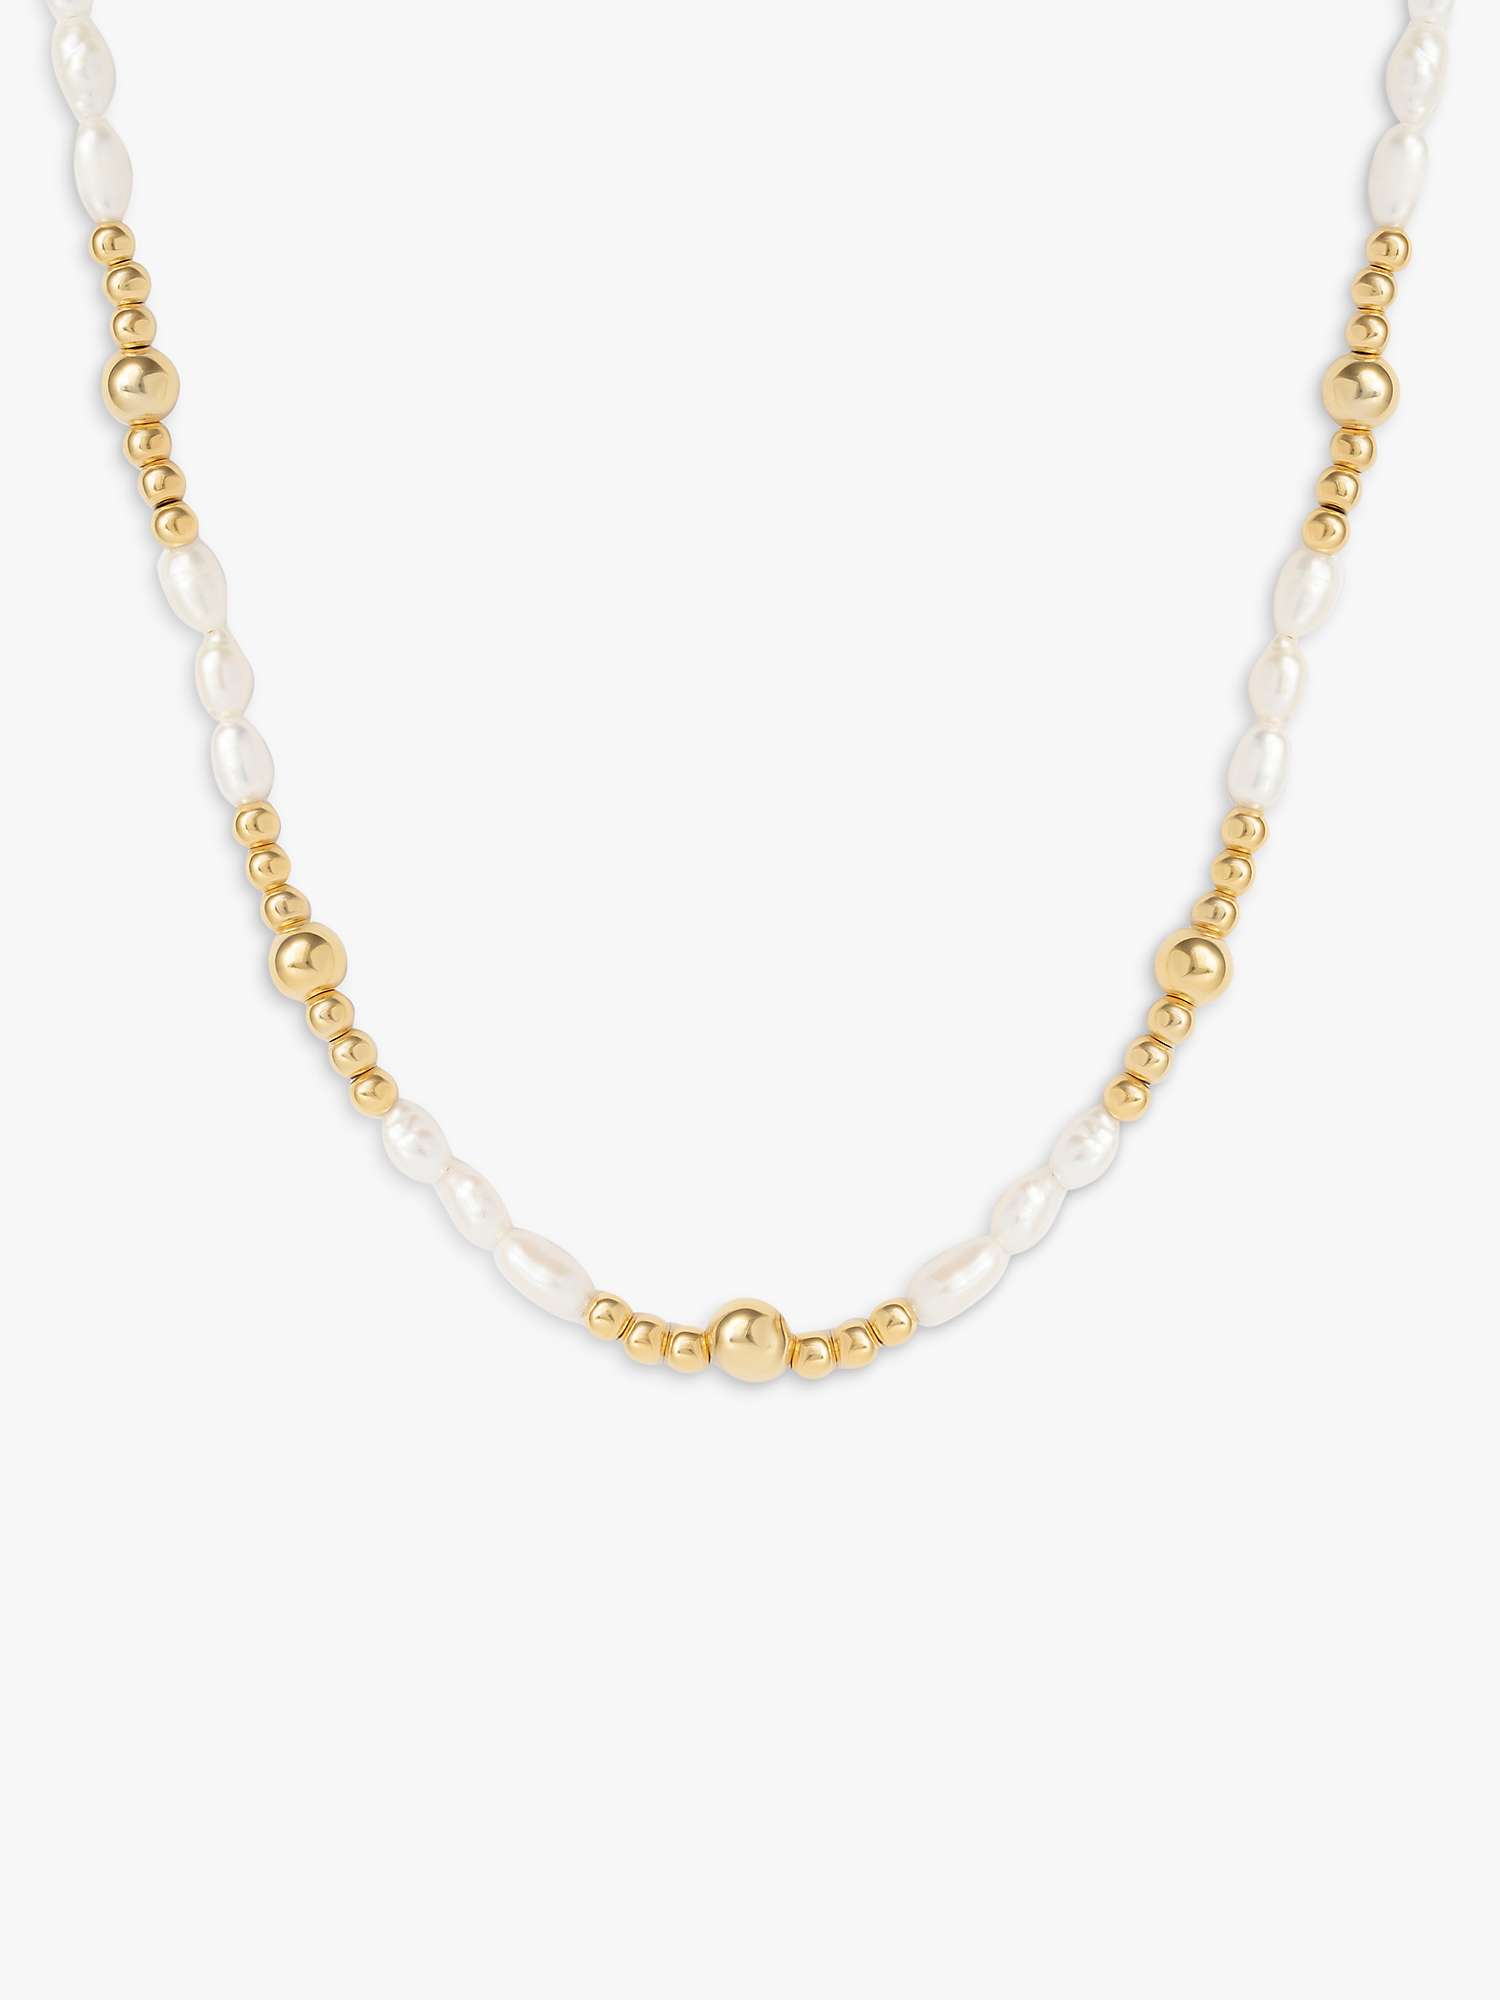 Buy LARNAUTI Annecy Freshwater Pearl Beaded Necklace, Gold/White Online at johnlewis.com